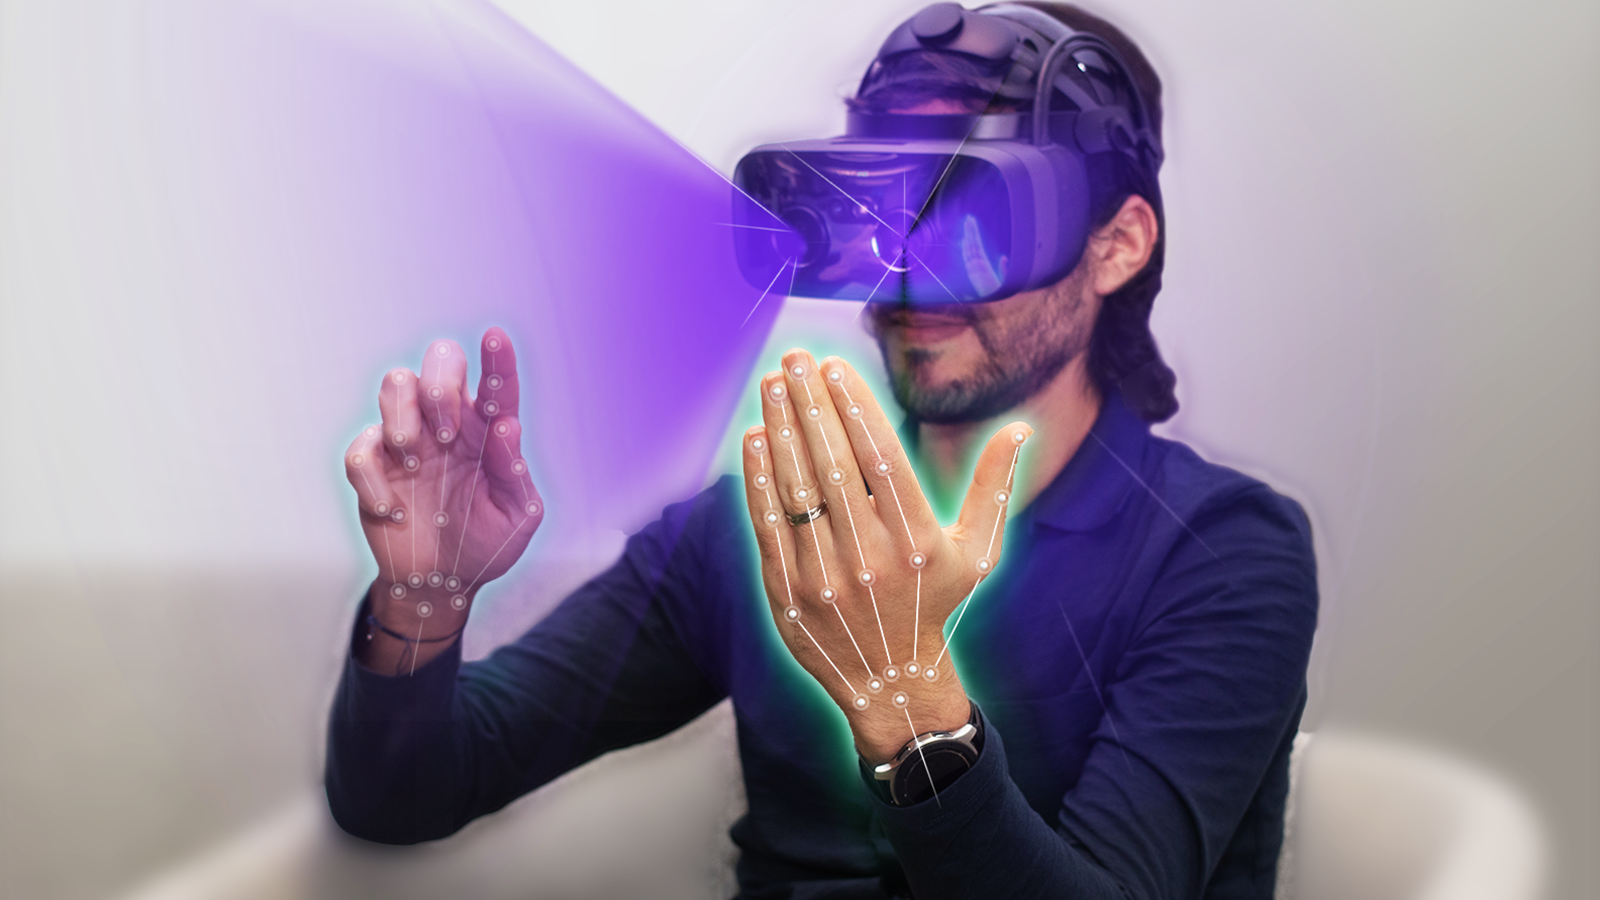 Hand tracking technology in virtual reality